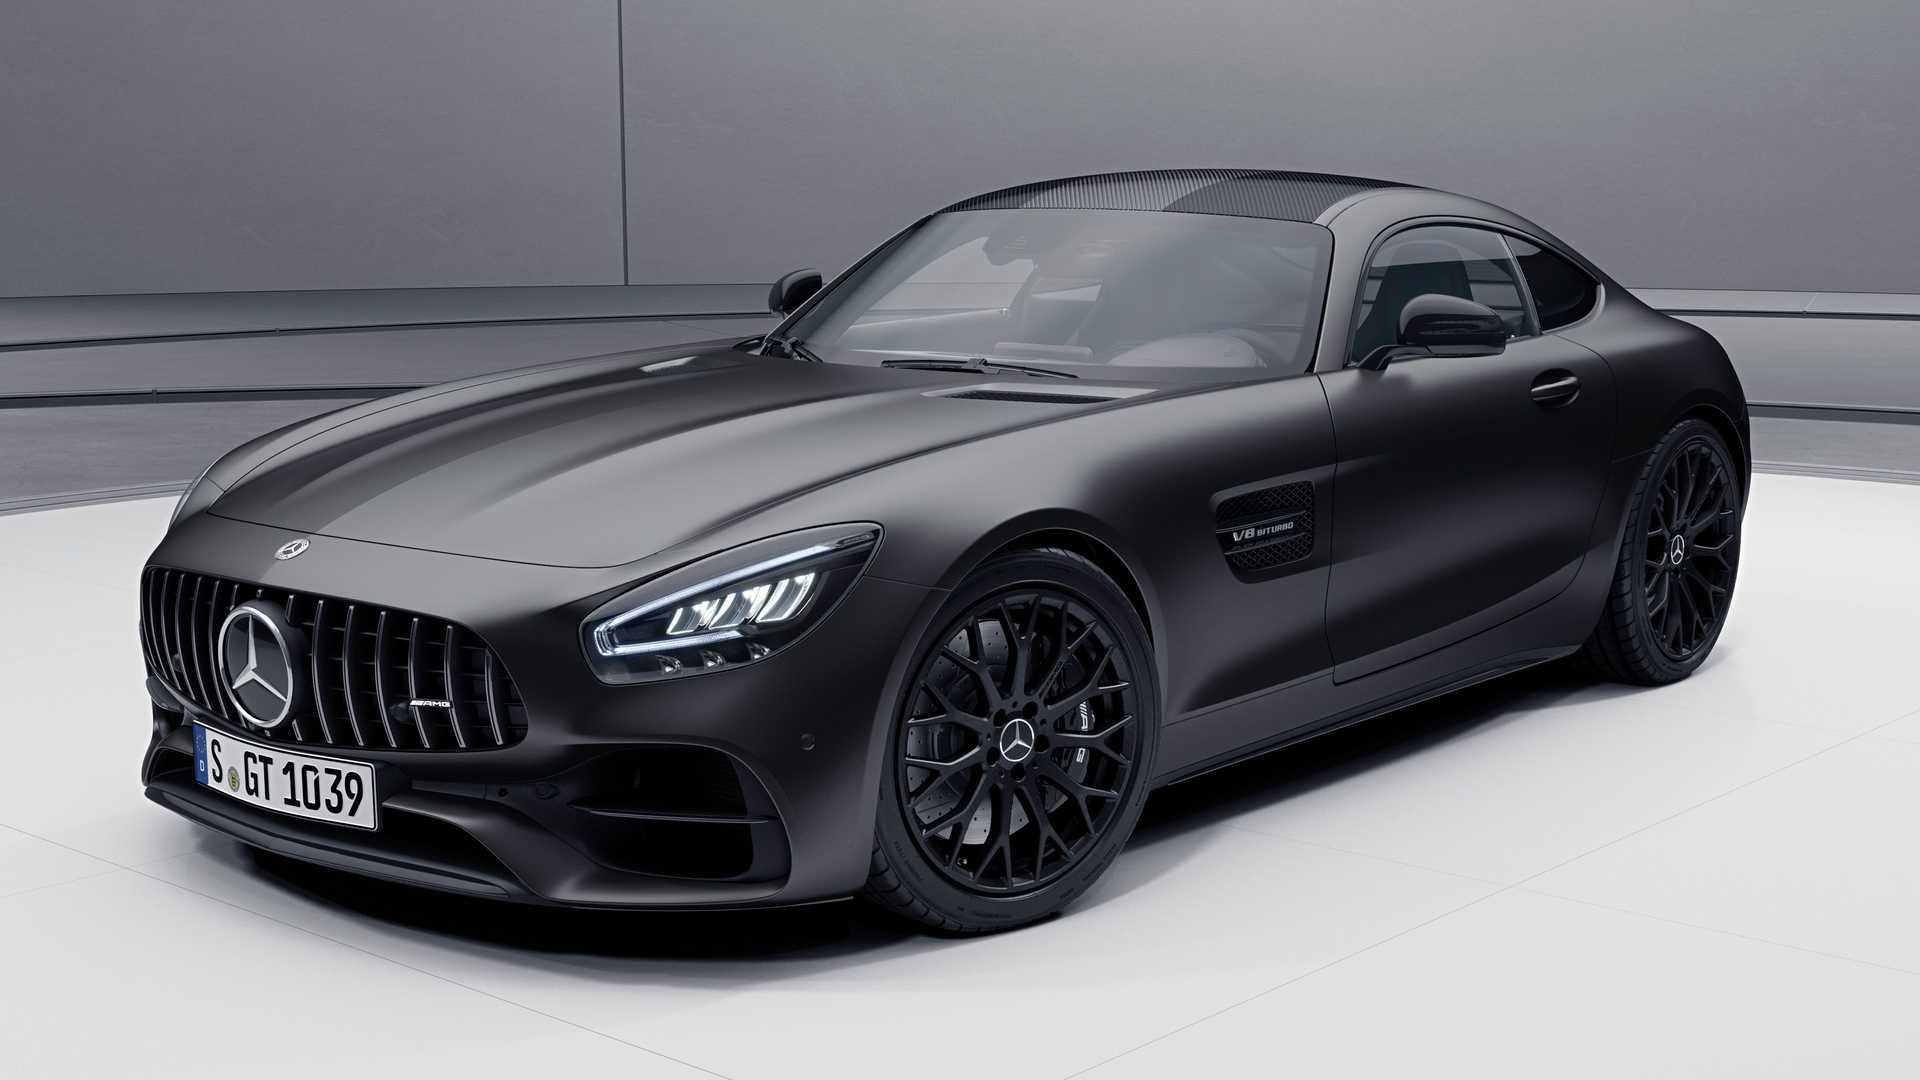 2021 Mercedes-AMG GT Coupe